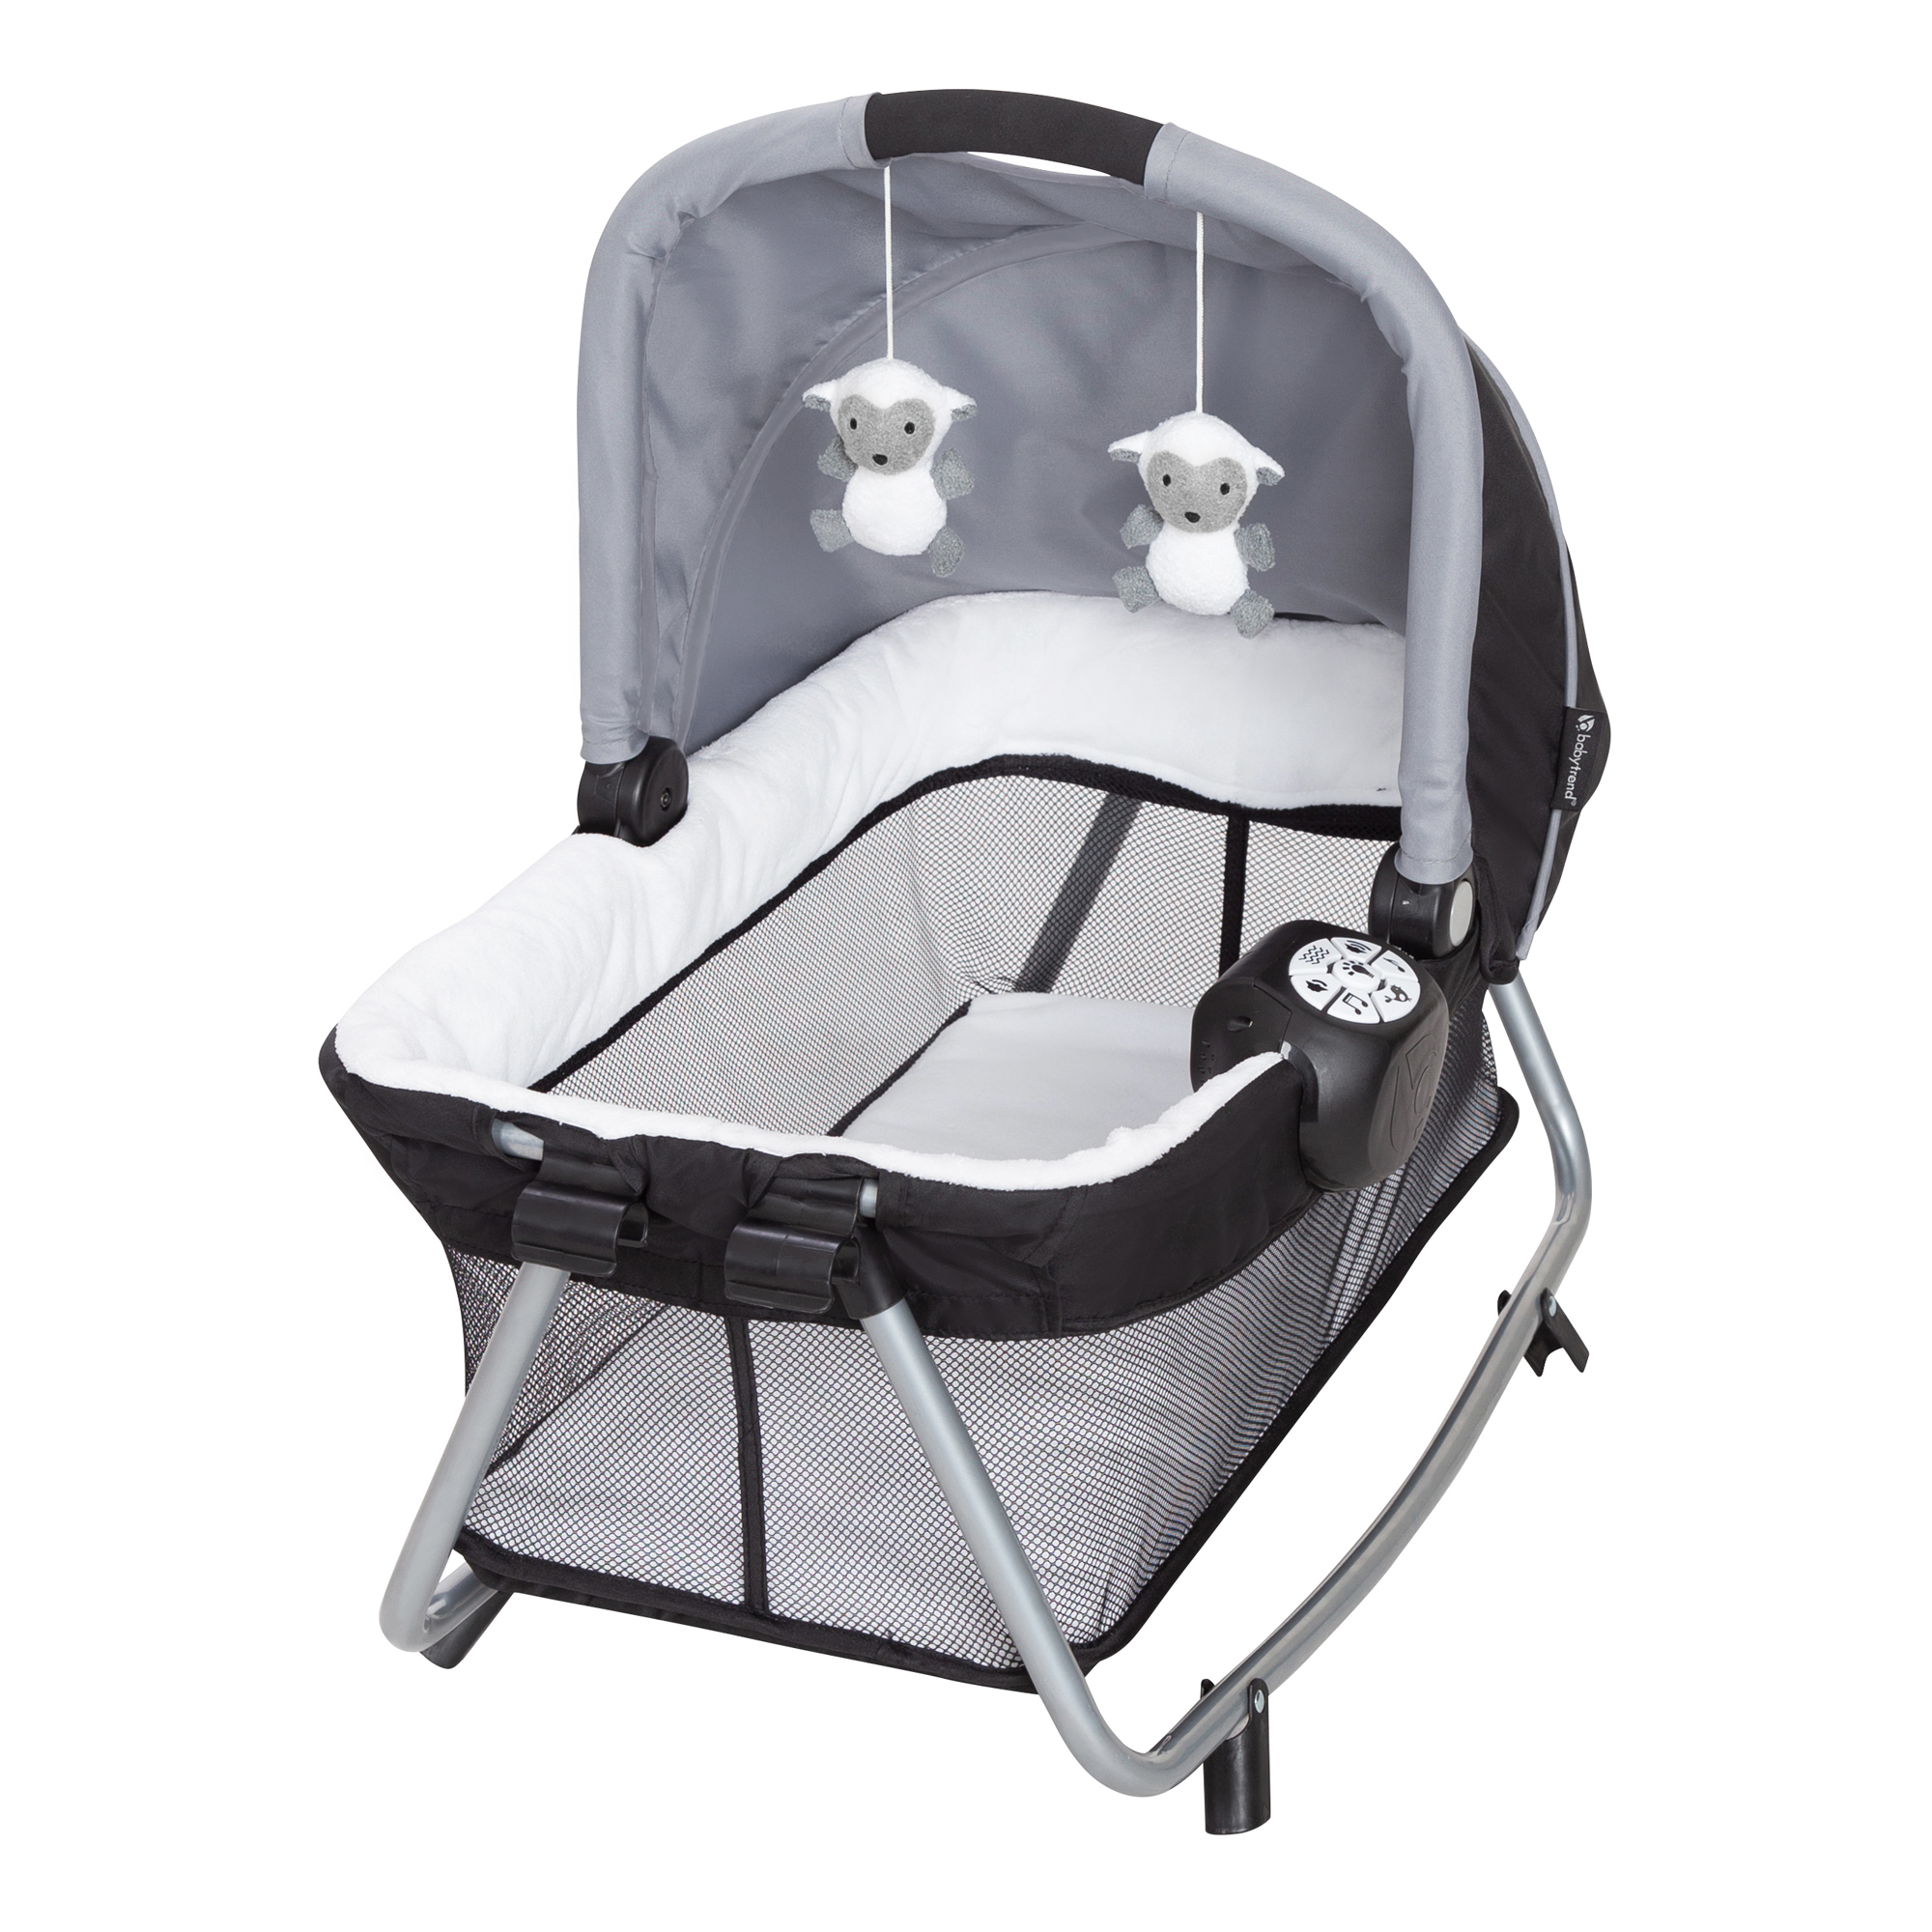 Baby Trend Simply Smart Nursery Center Playard with Bassinet and Travel Bag - Whisper Grey - image 5 of 11